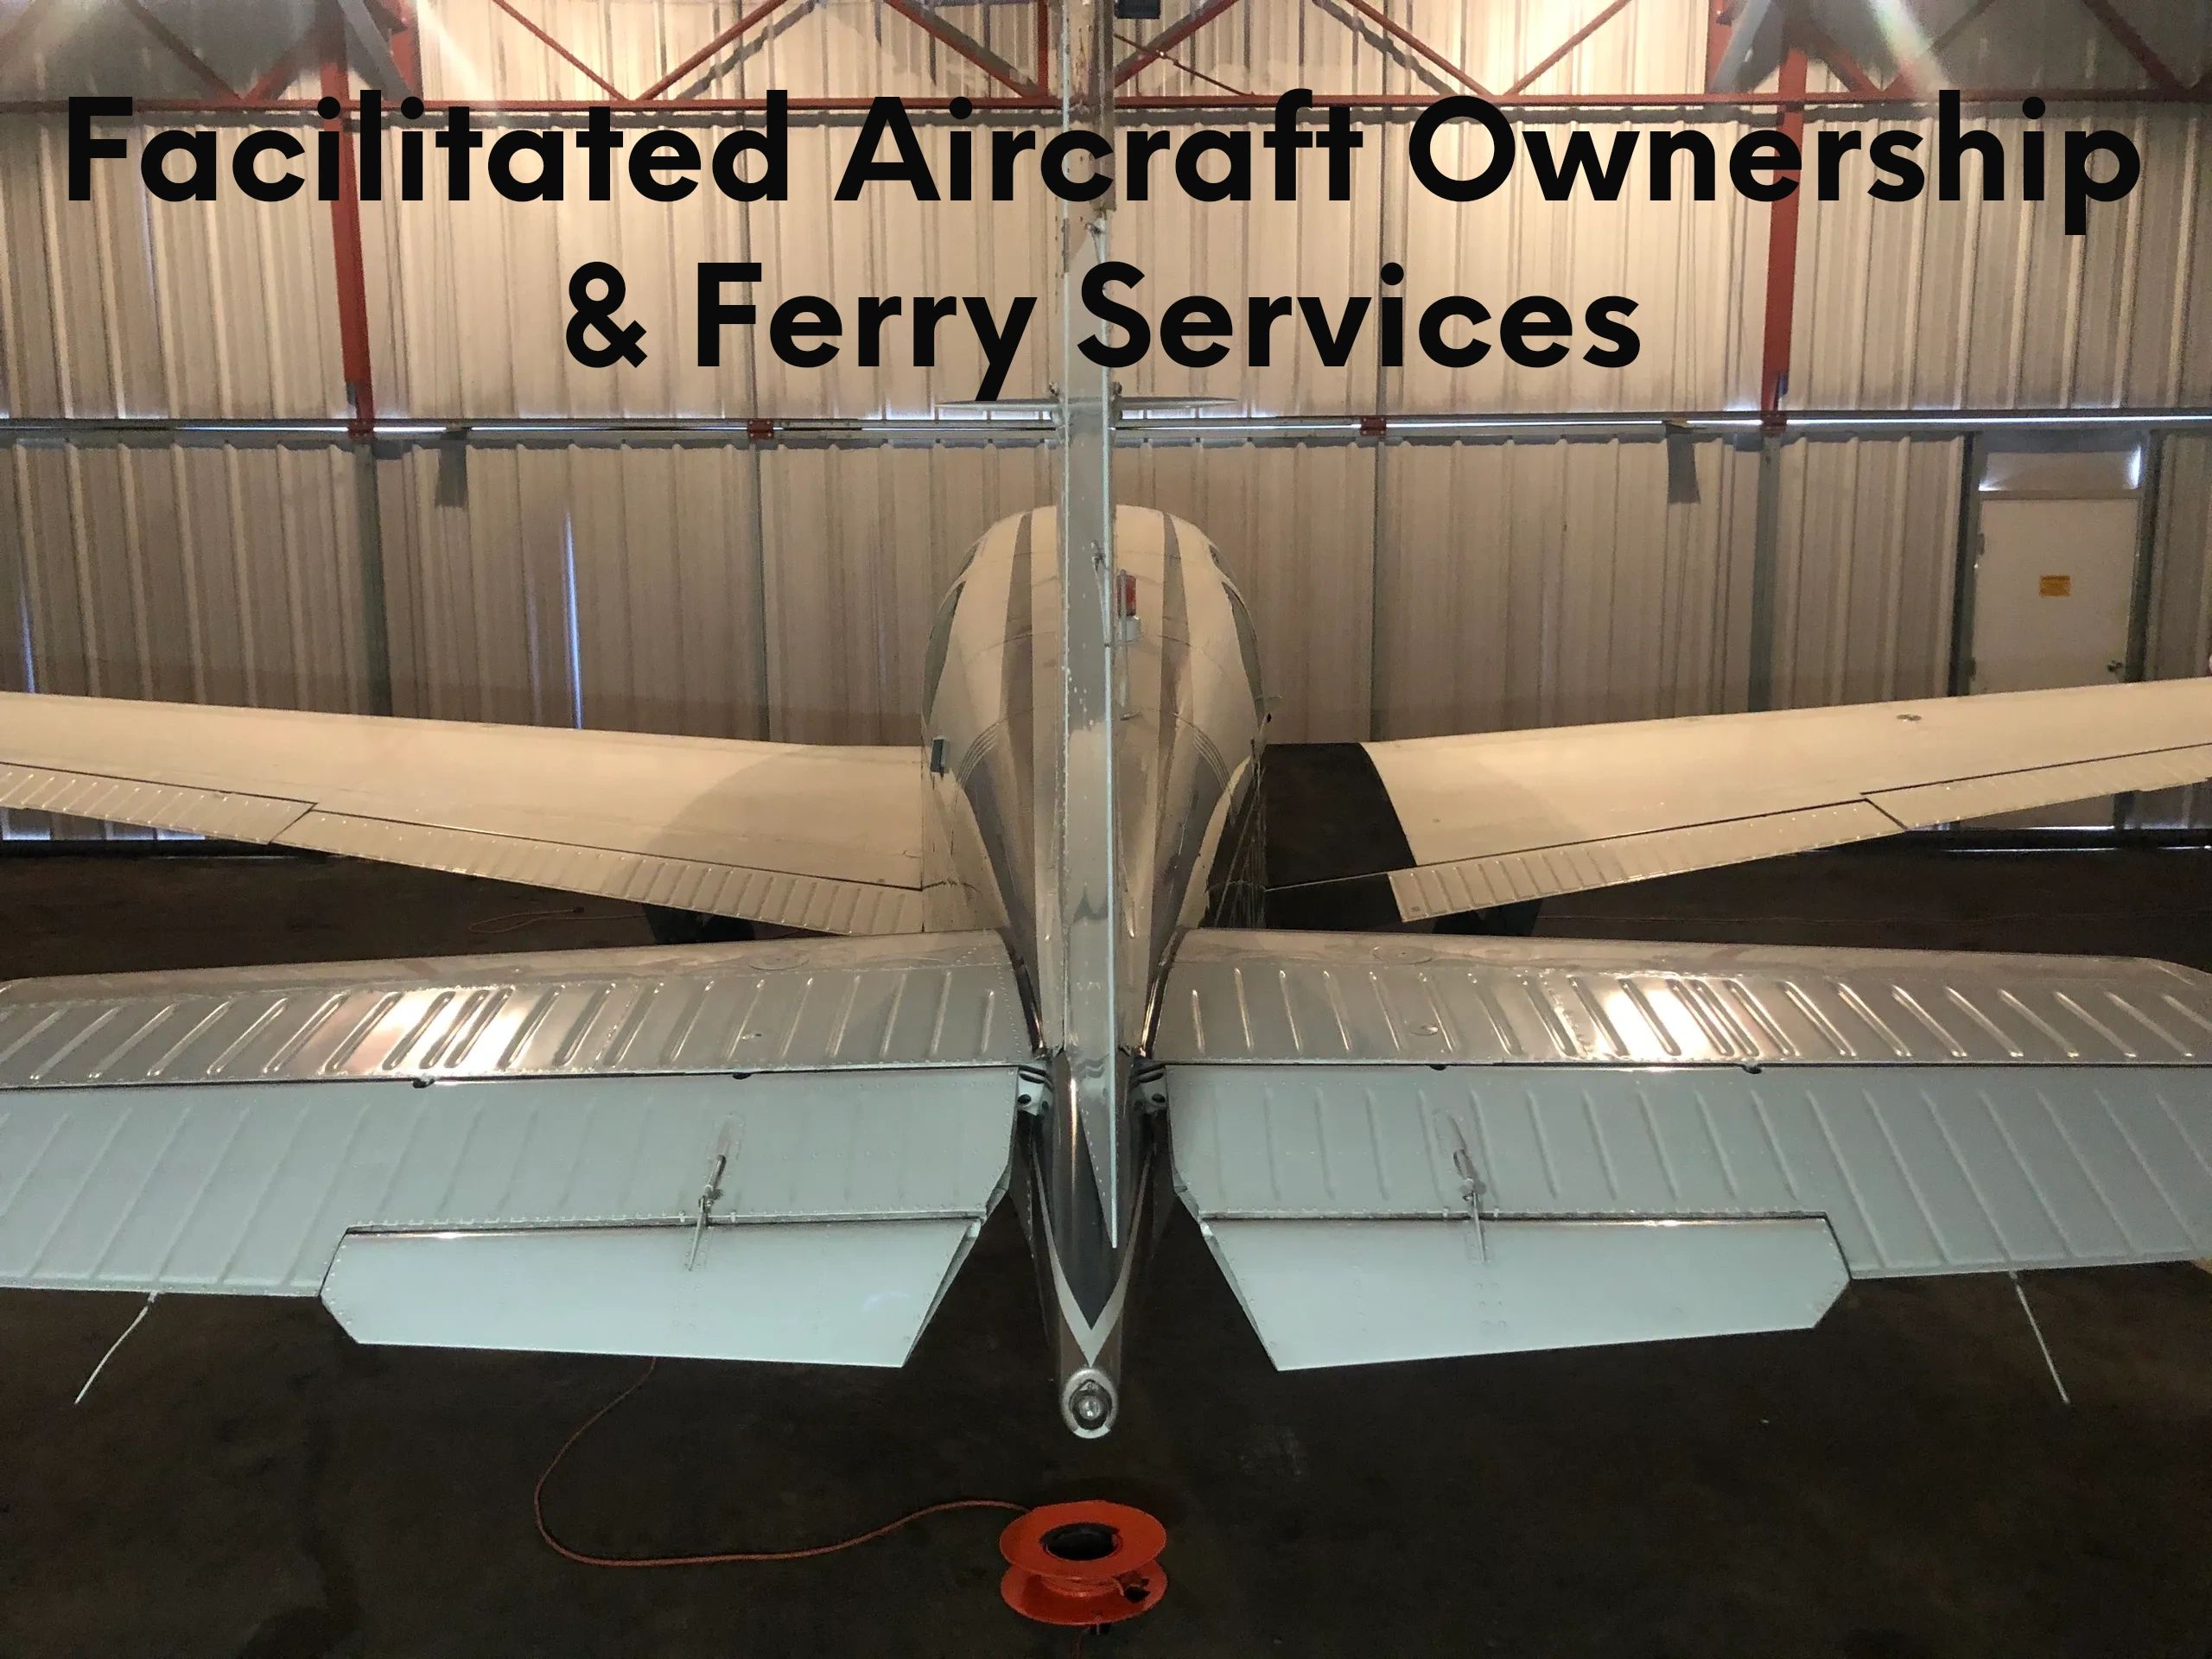 Facilitated Aircraft Ownership & Ferry Services